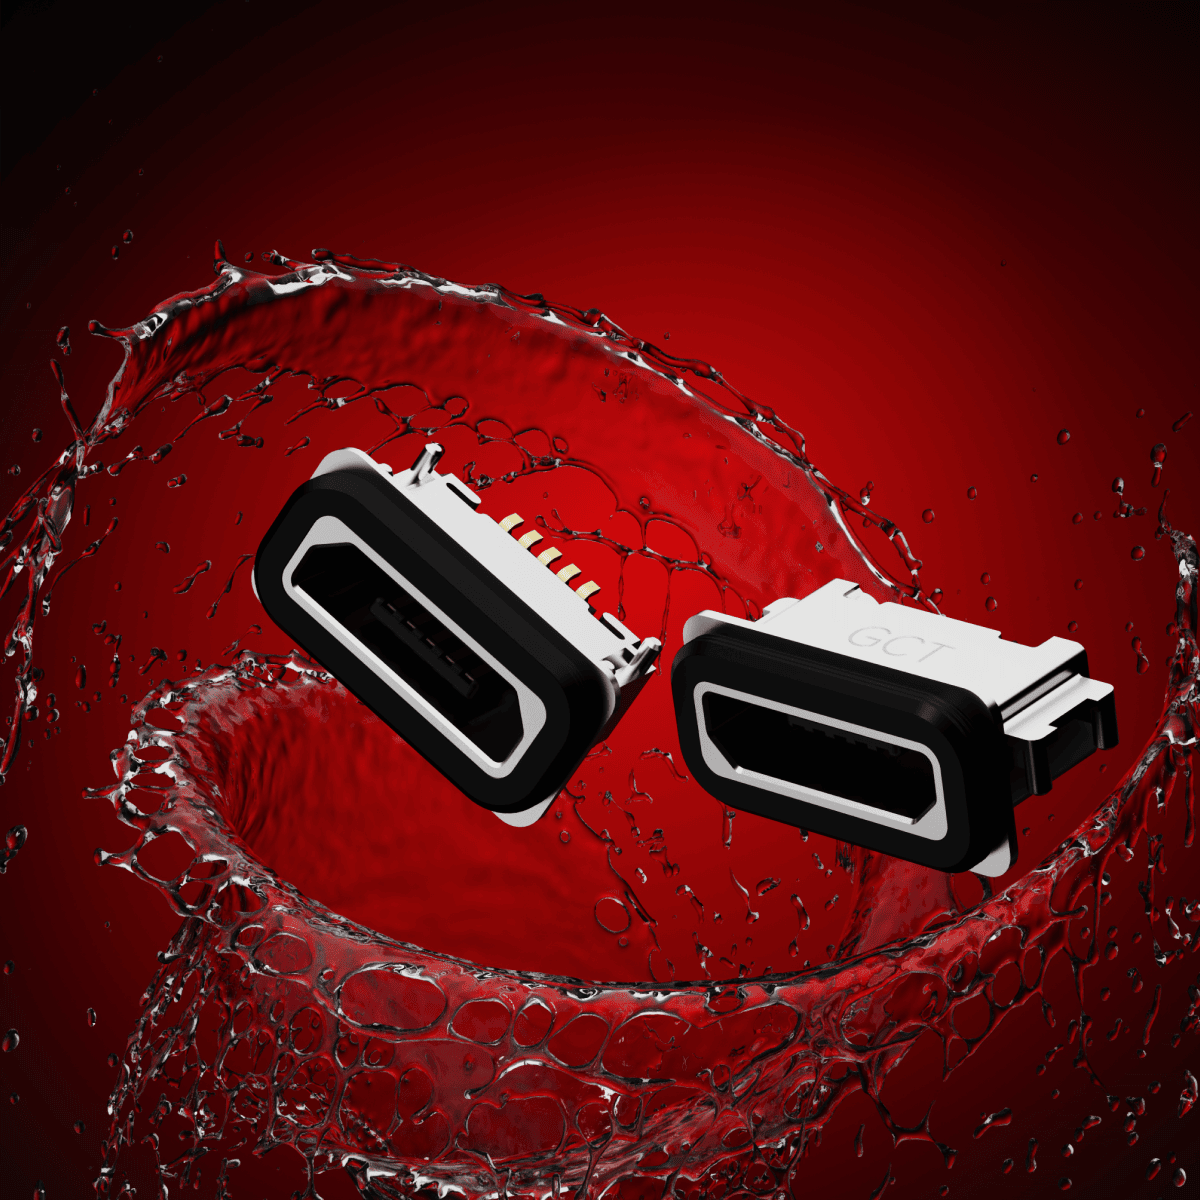 With every part tested for compliance you can rely on GCT's IP rated micro USB's